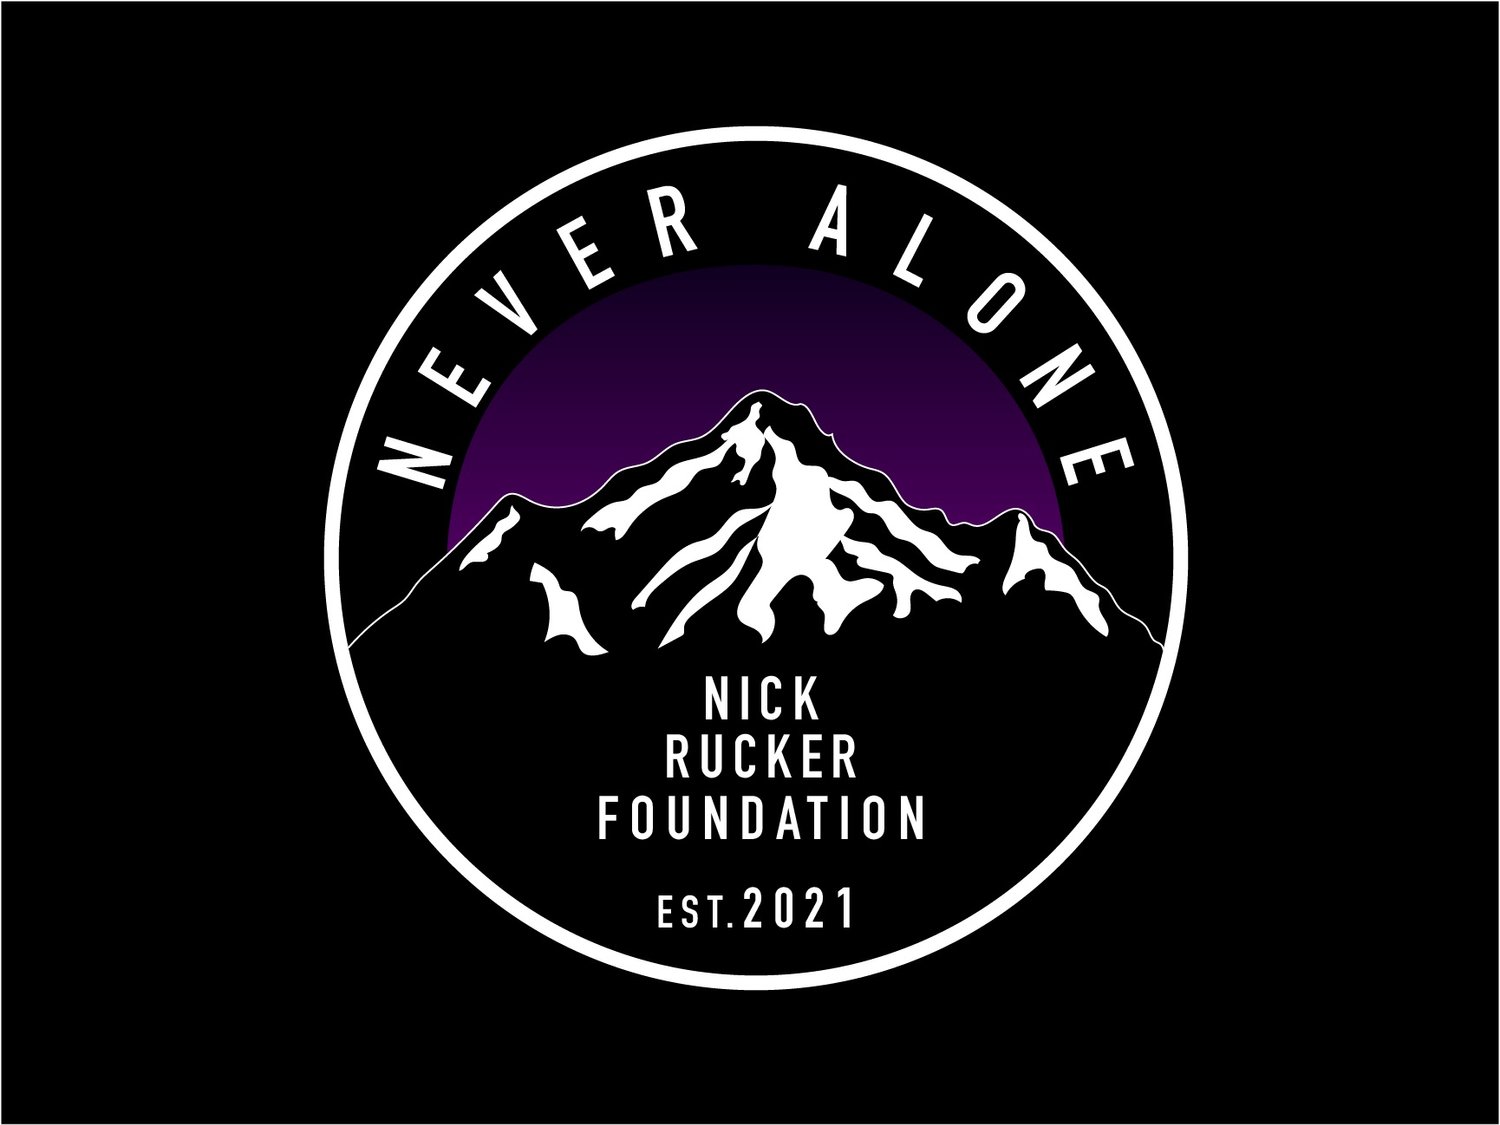 The Never Alone Nick Rucker Foundation, Inc. 